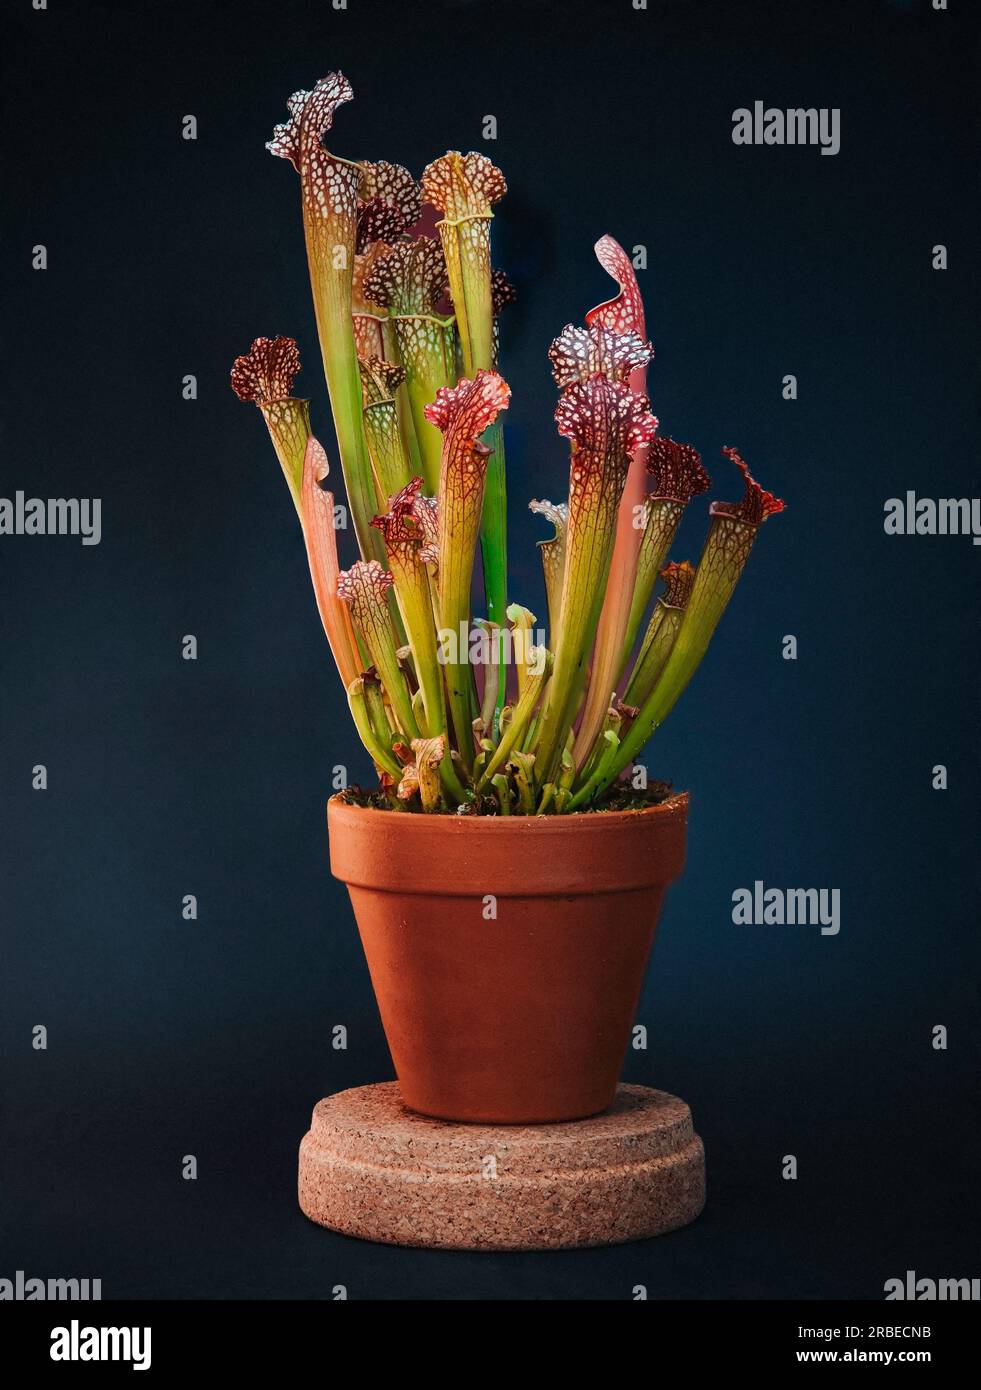 Pitcher Plant with black background Stock Photo